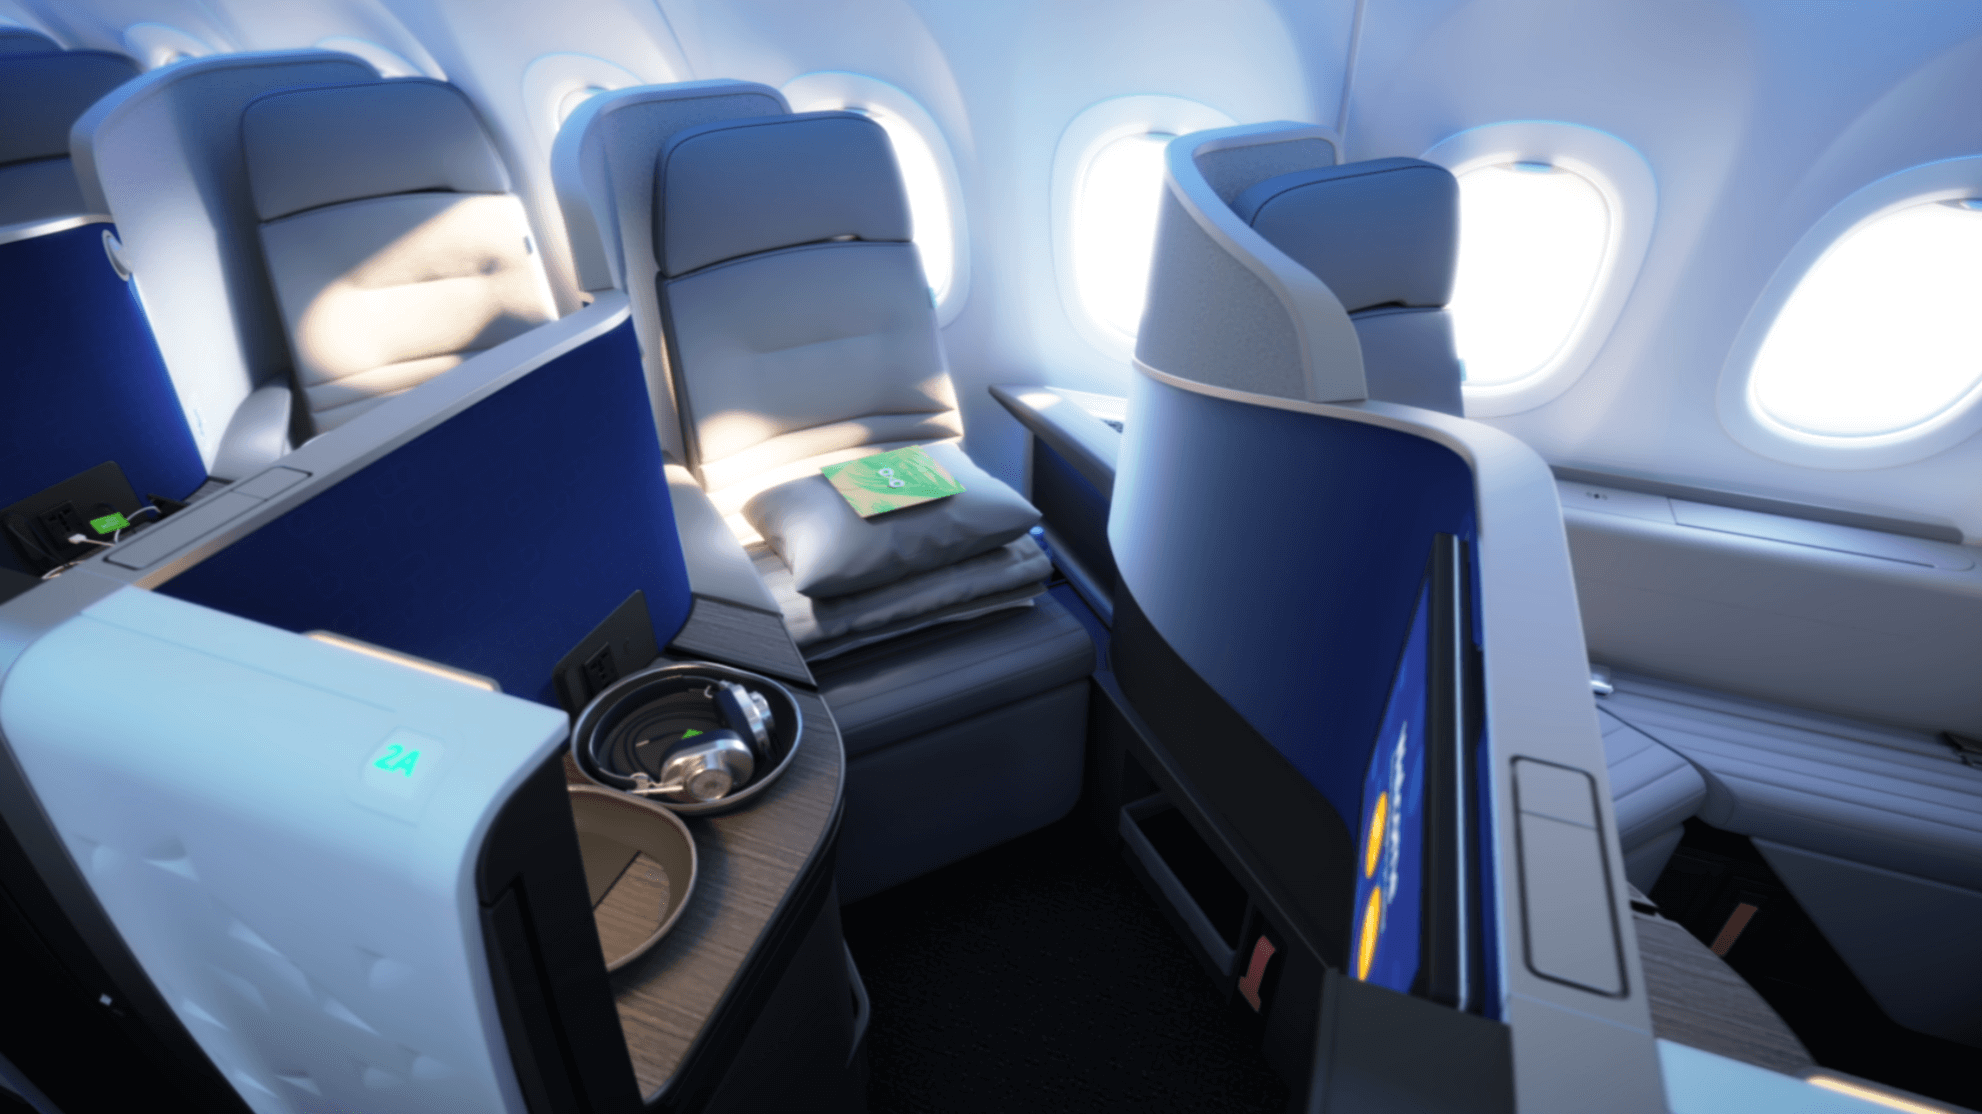 How to Book JetBlue Mint With Qatar Points?